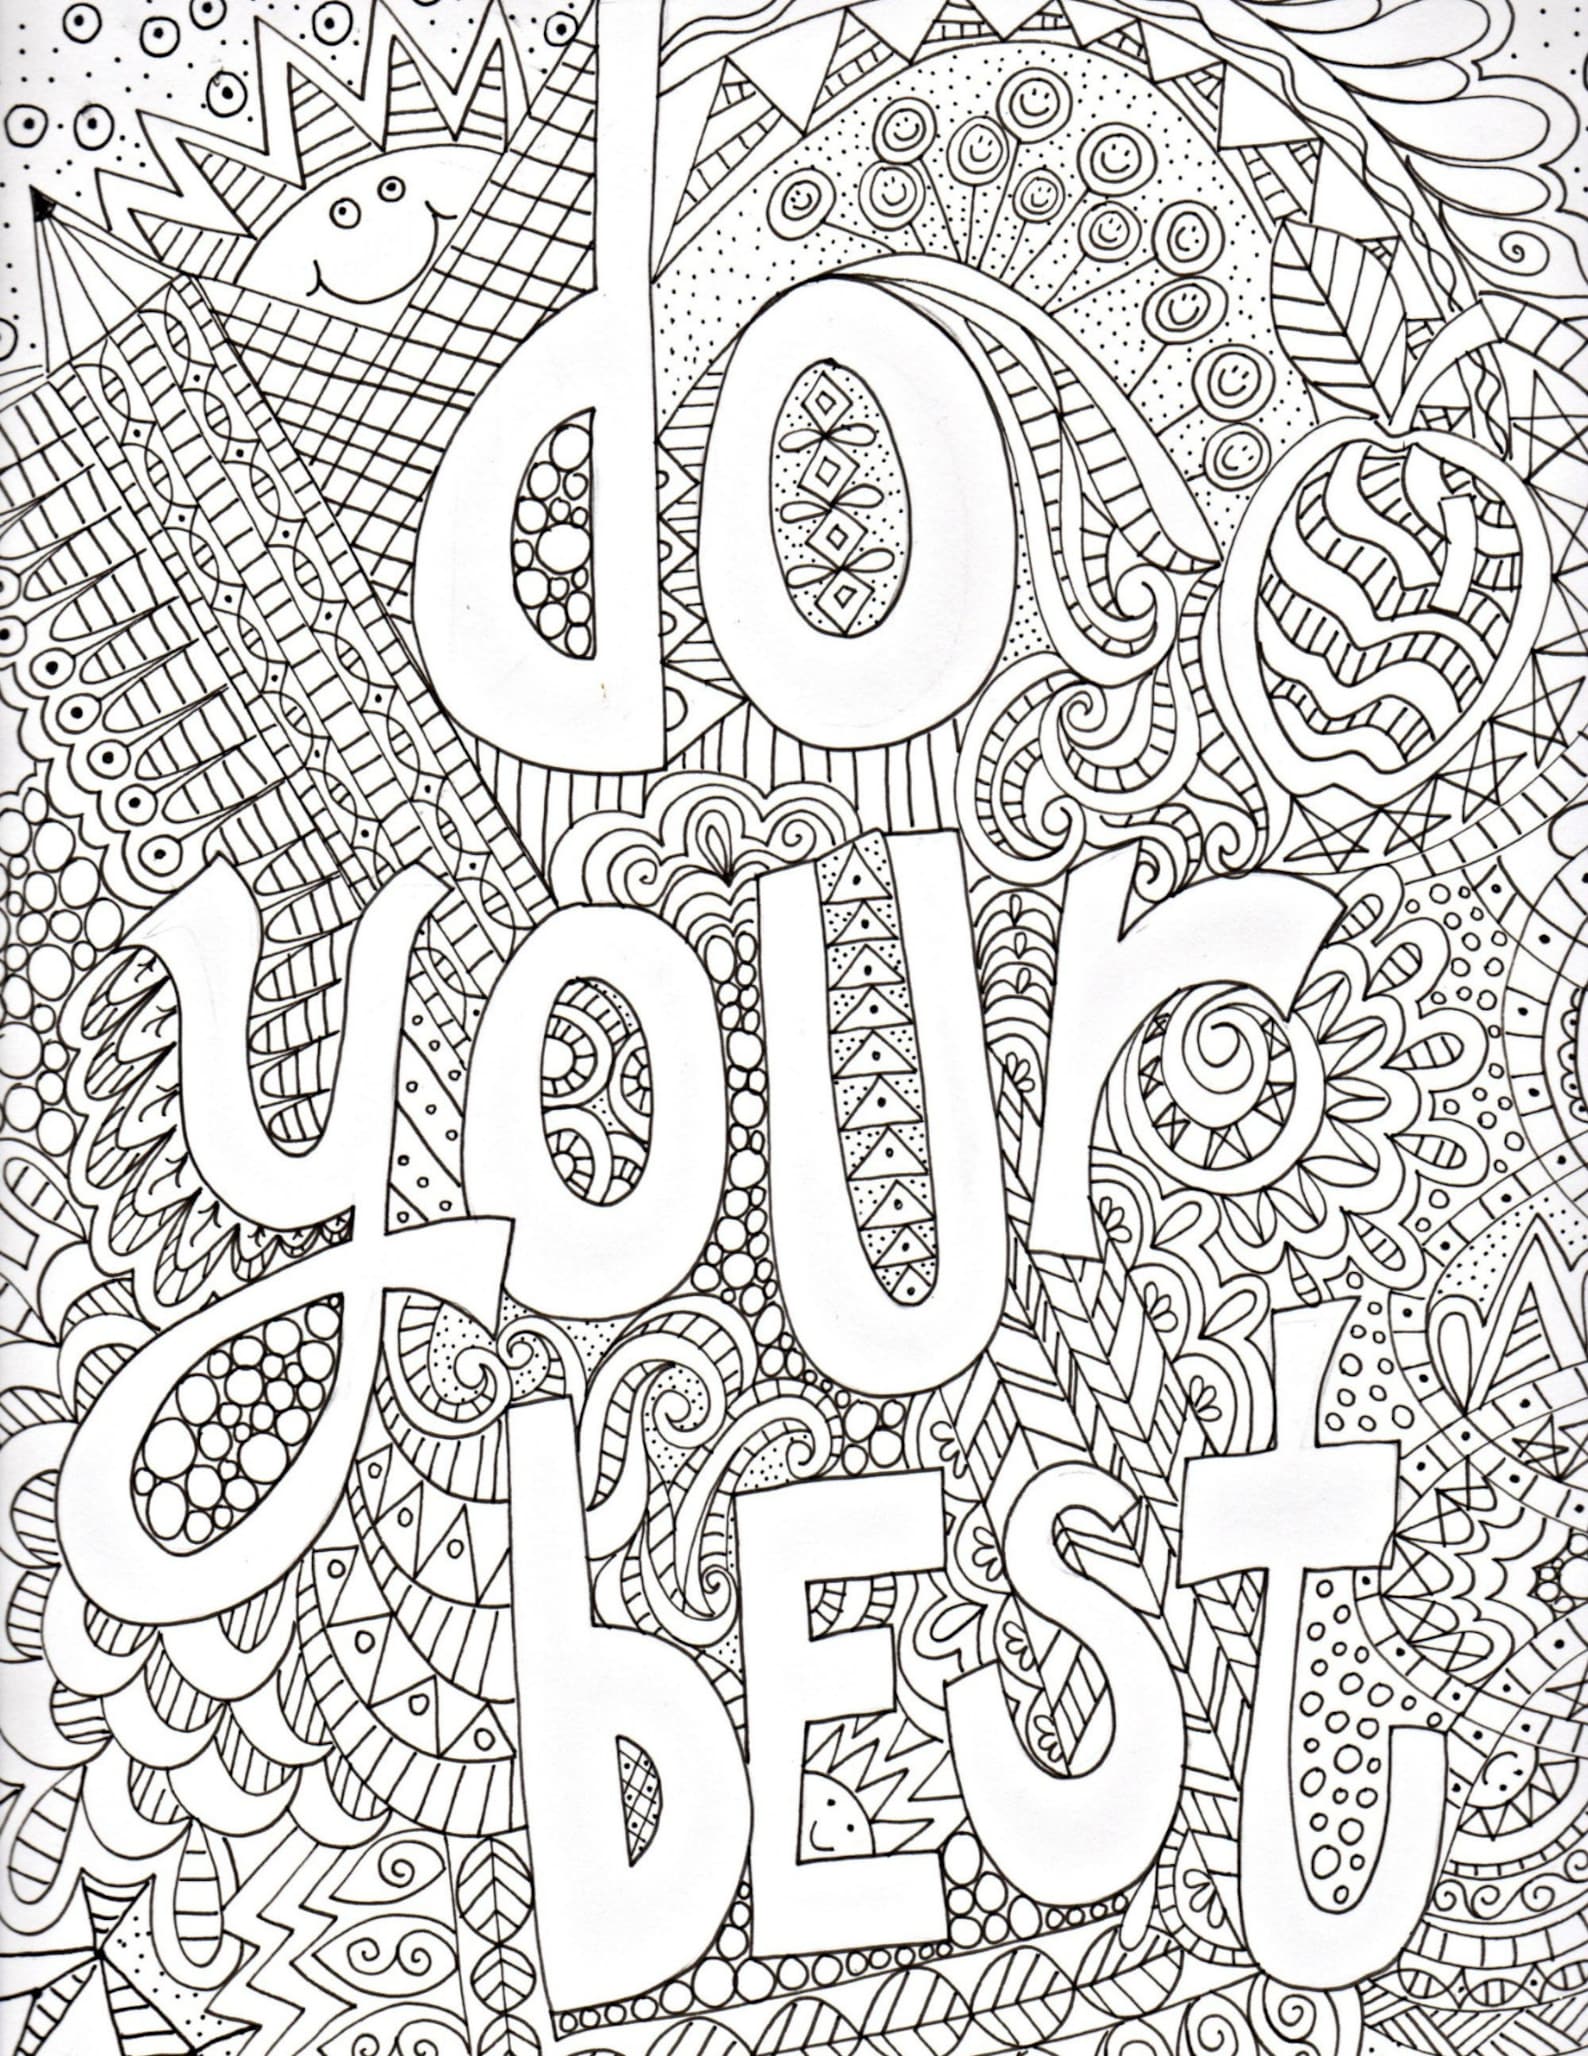 98-page-anxiety-stress-relief-coloring-book-for-adults-etsy